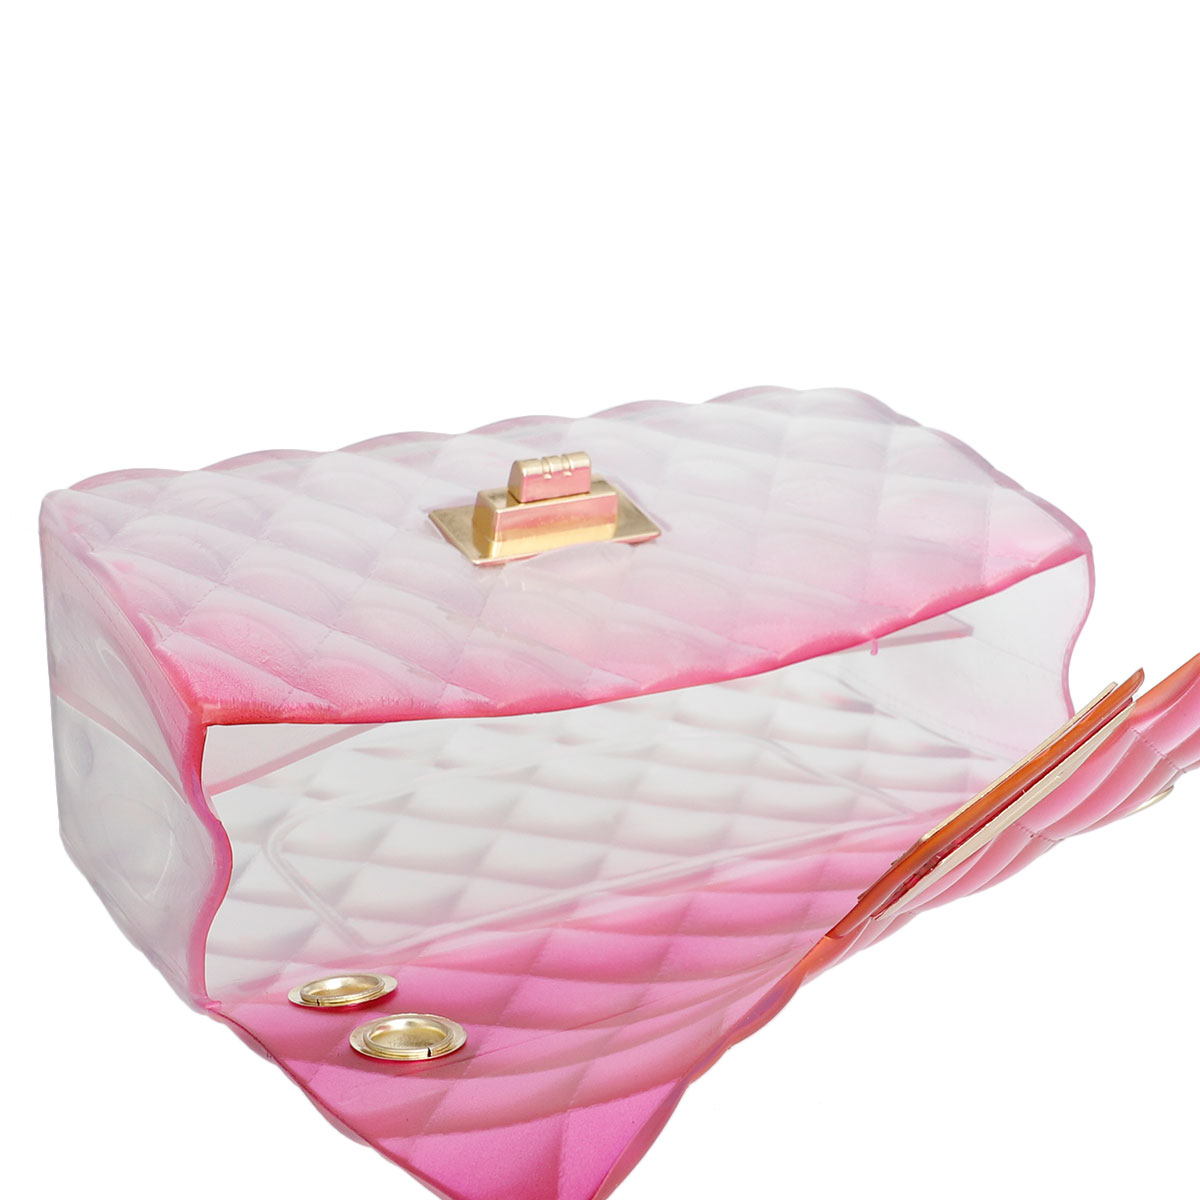 Clear Pink Quilted Flap Mini Jelly Bag